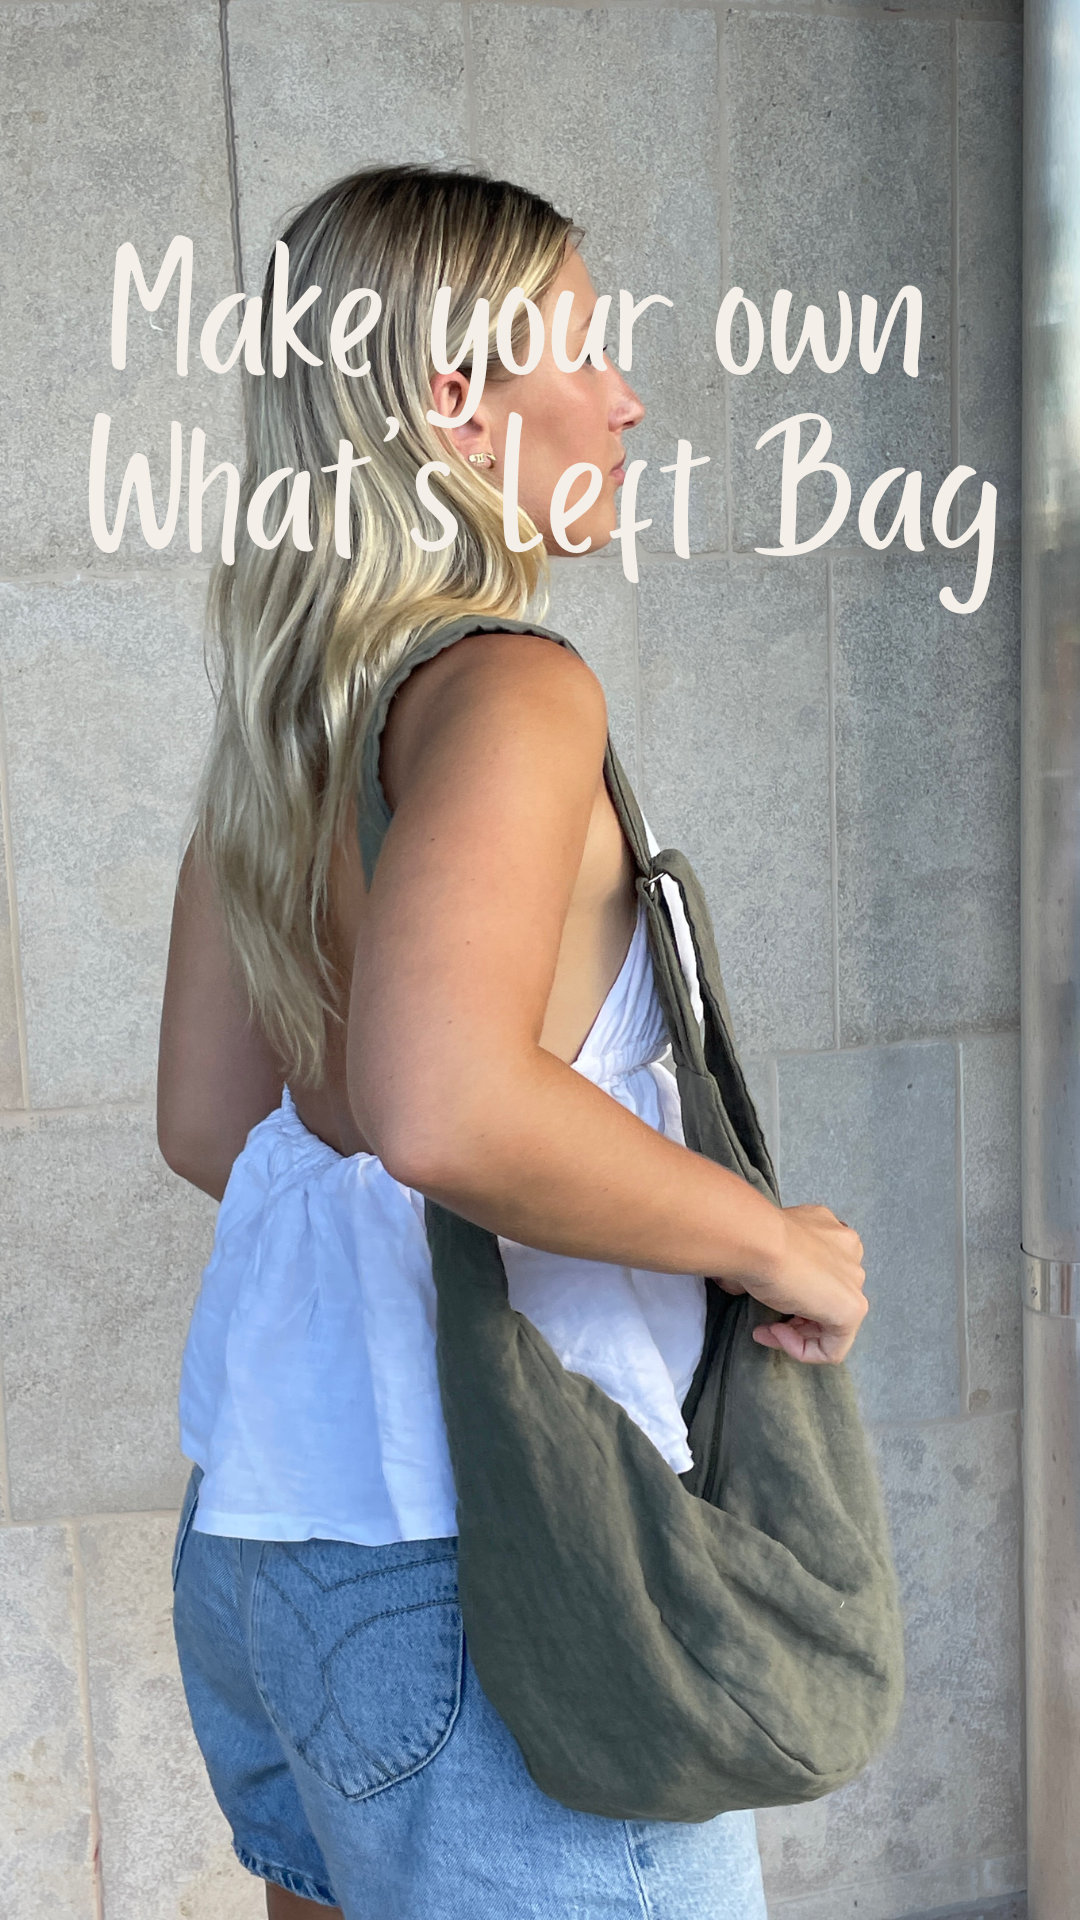 Sewing Pattern the What's Left Bag